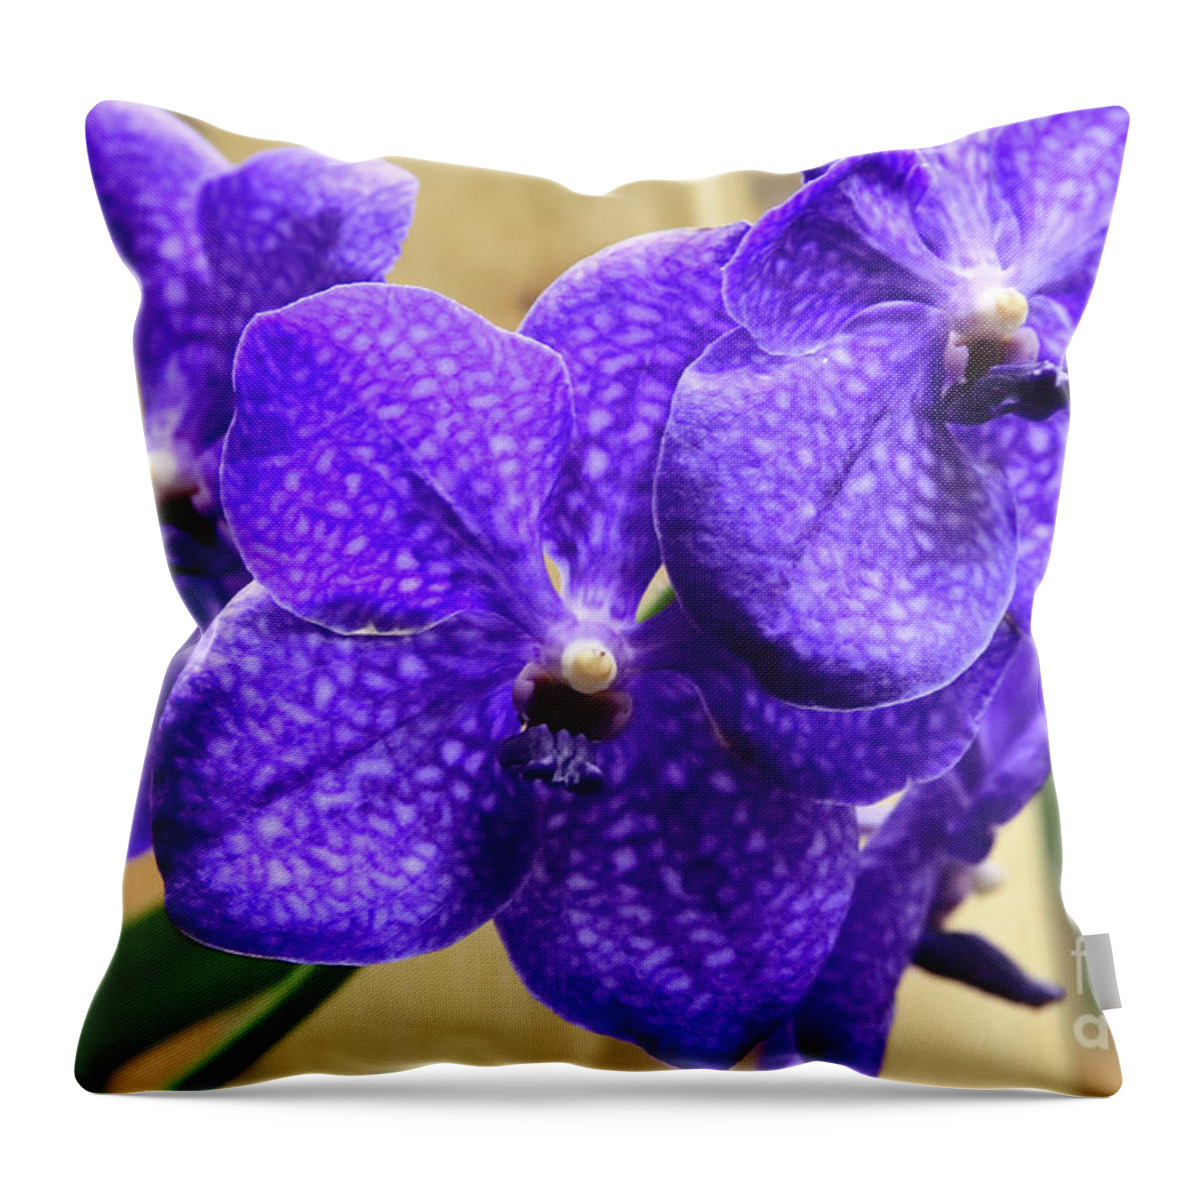 China Throw Pillow featuring the photograph Vanda Orchid II by Tanya Owens